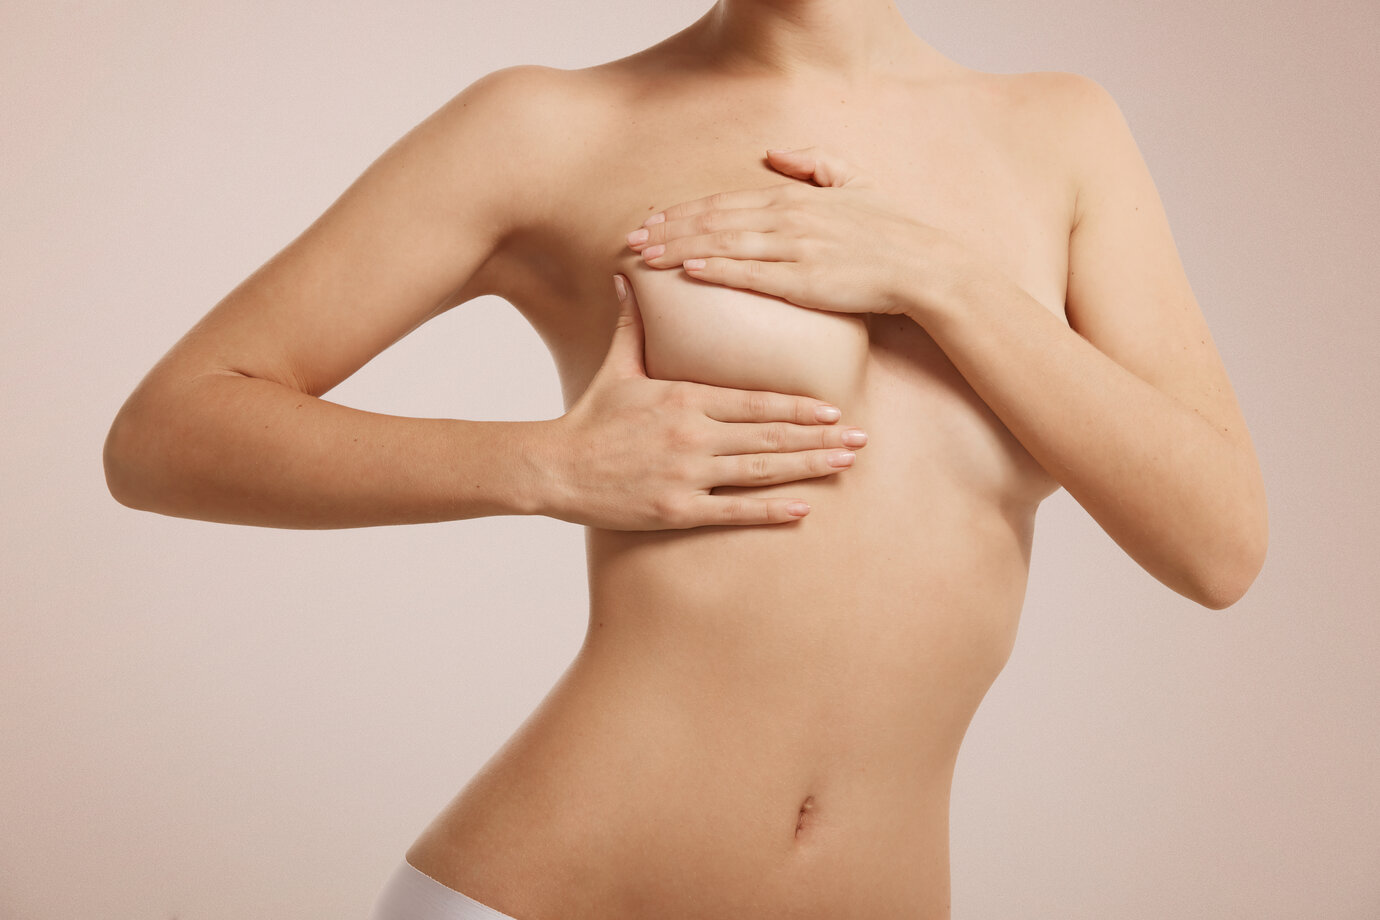 How much does a breast reduction surgery cost?